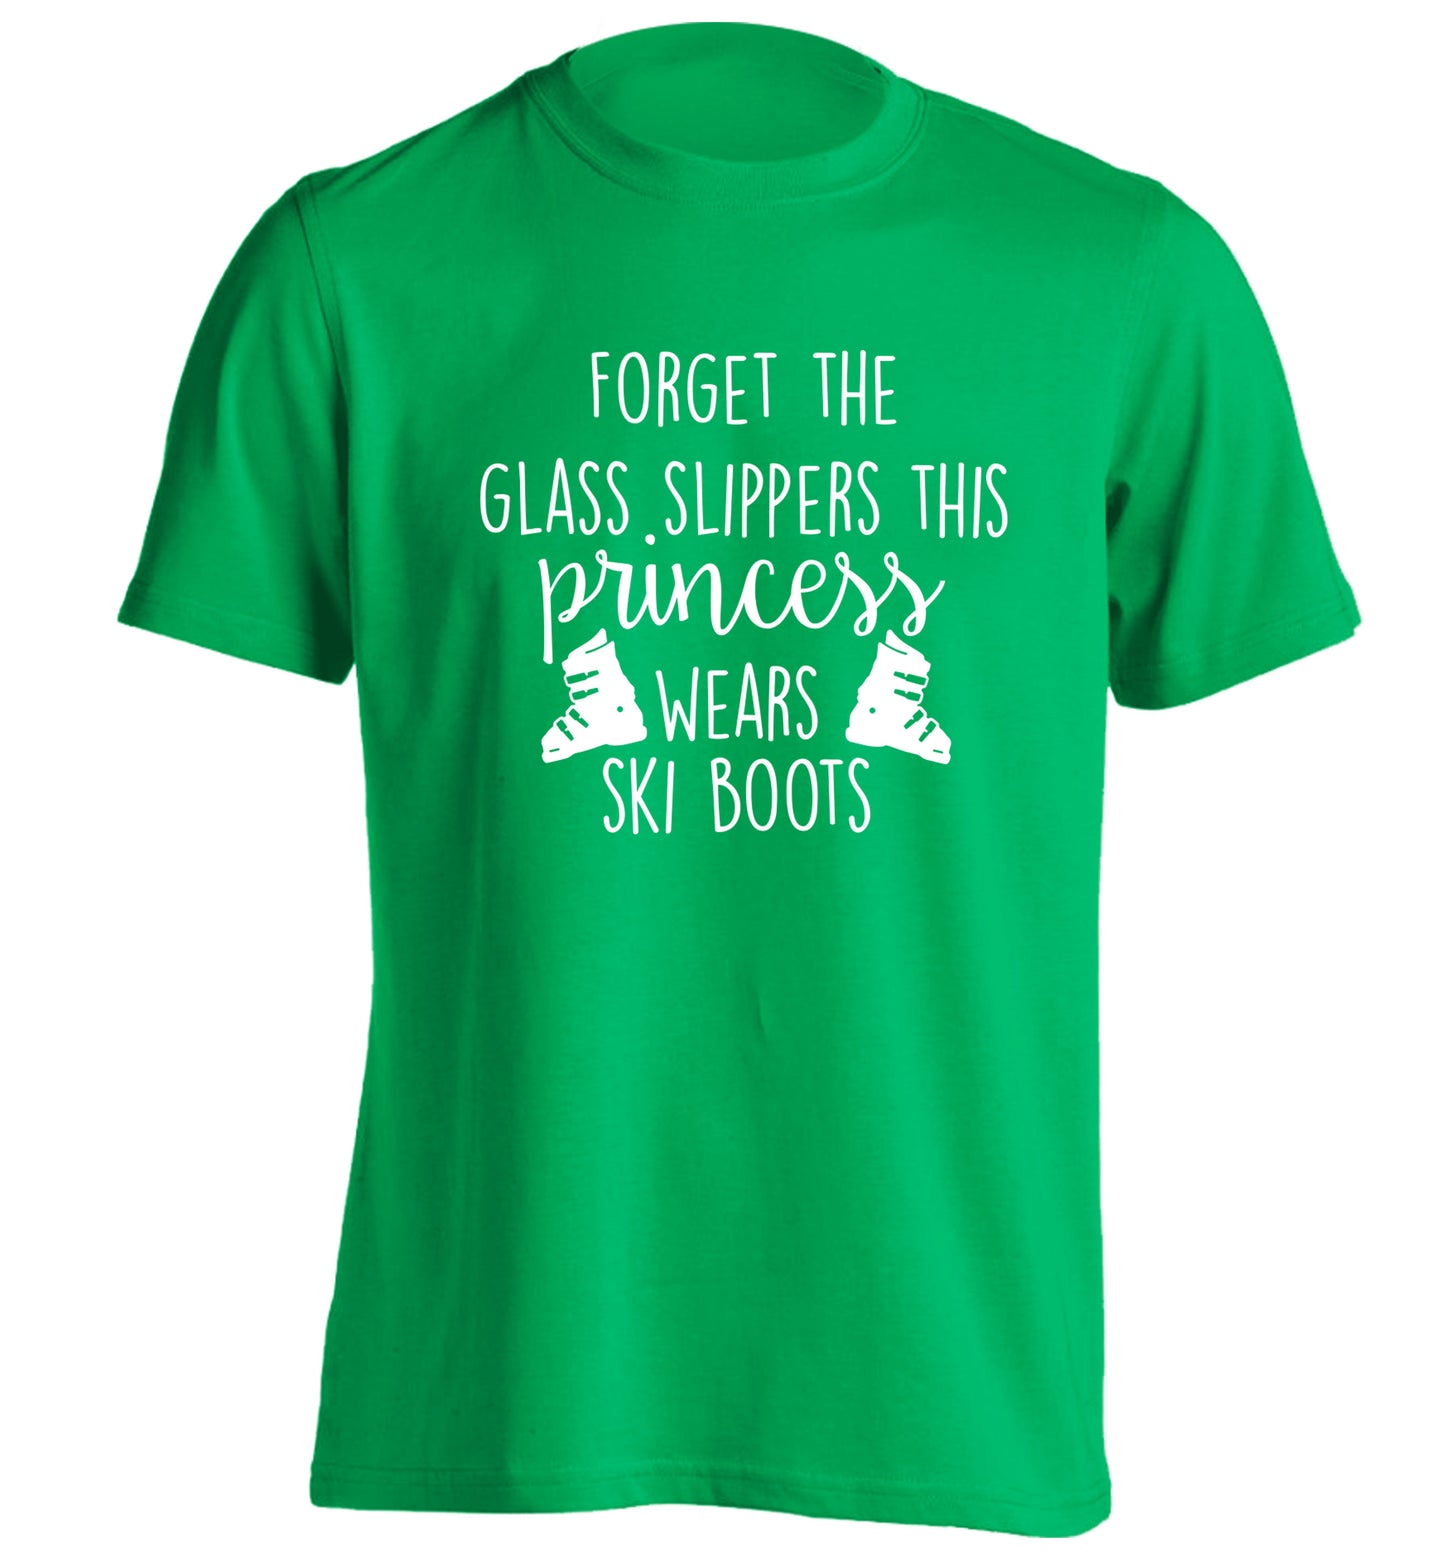 Forget the glass slippers this princess wears ski boots adults unisex green Tshirt 2XL